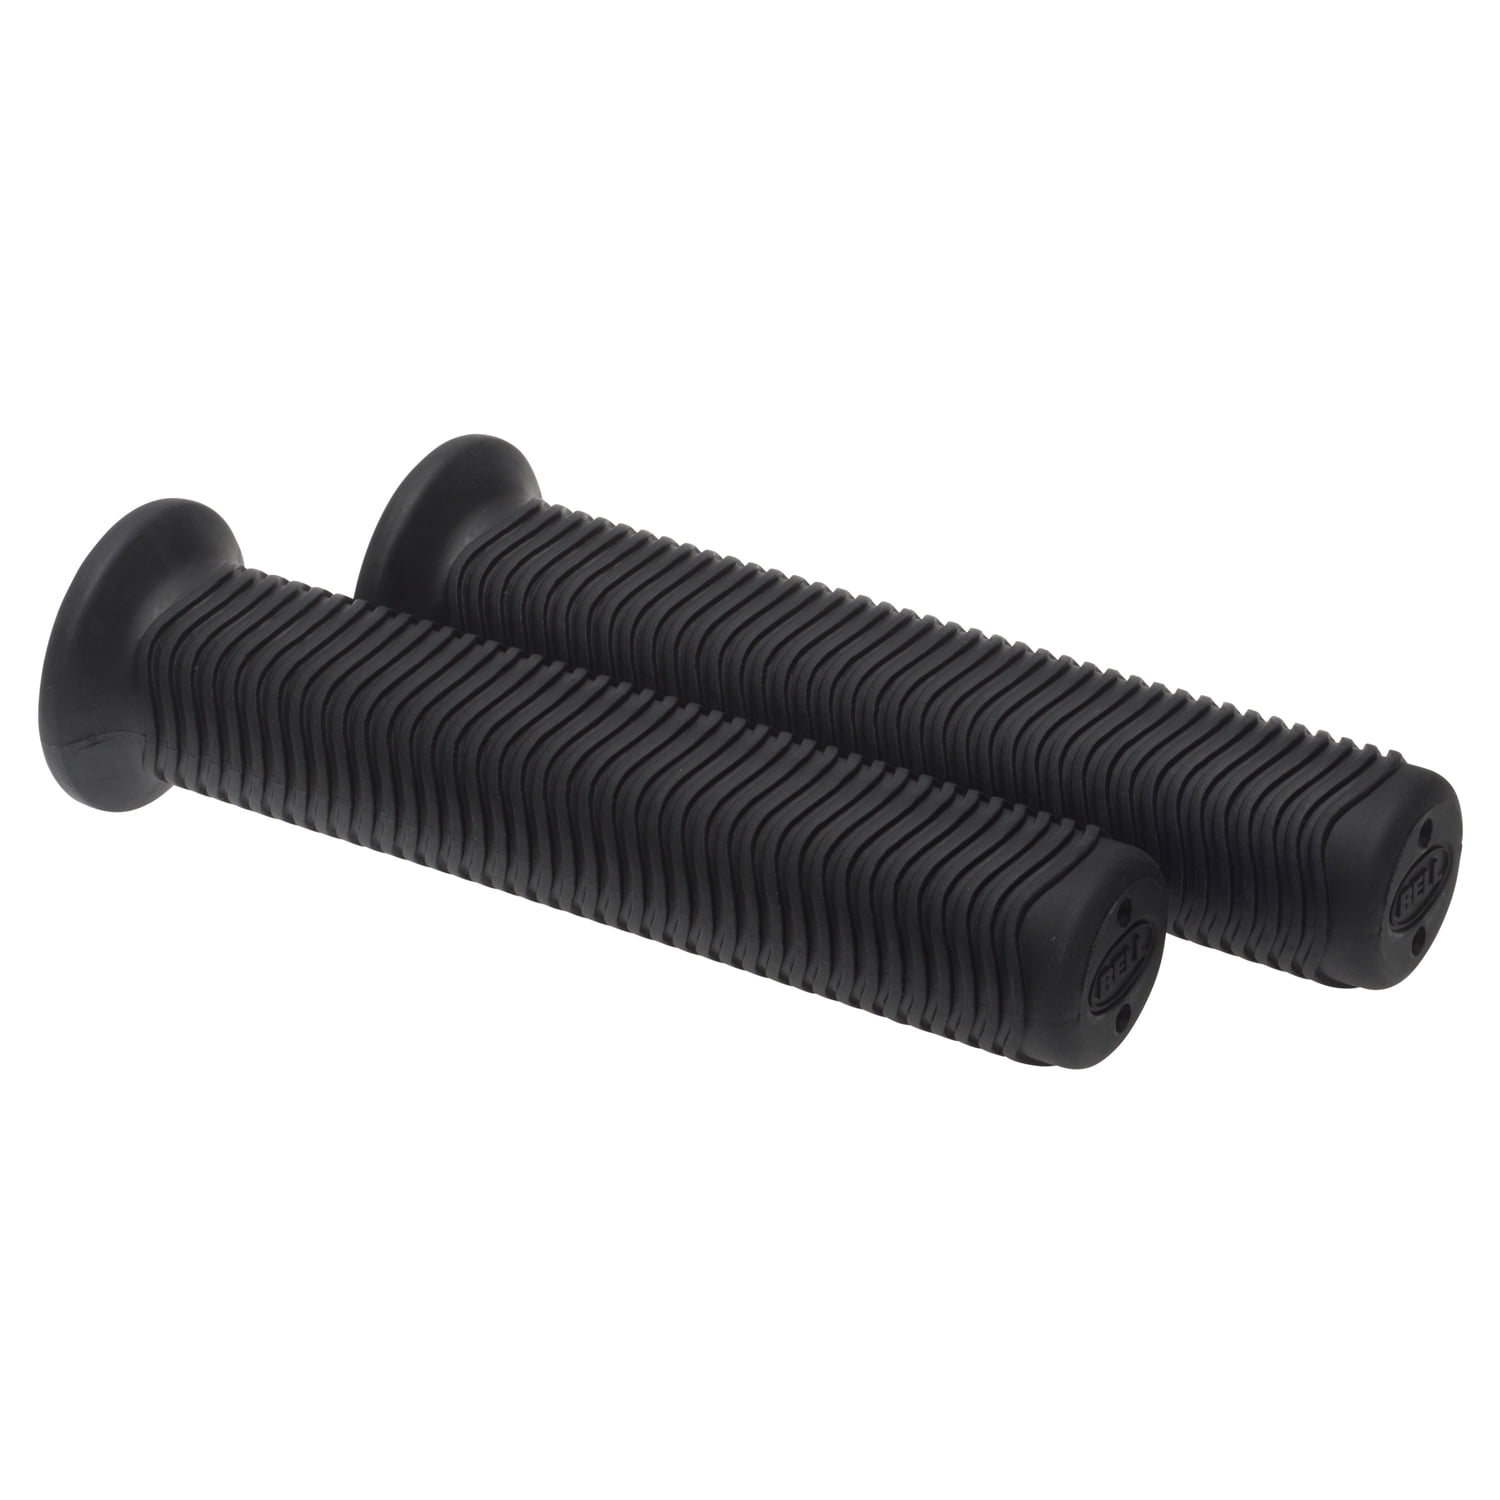 Picture of Bell Sports 7090910 350 Pump BMX Grips